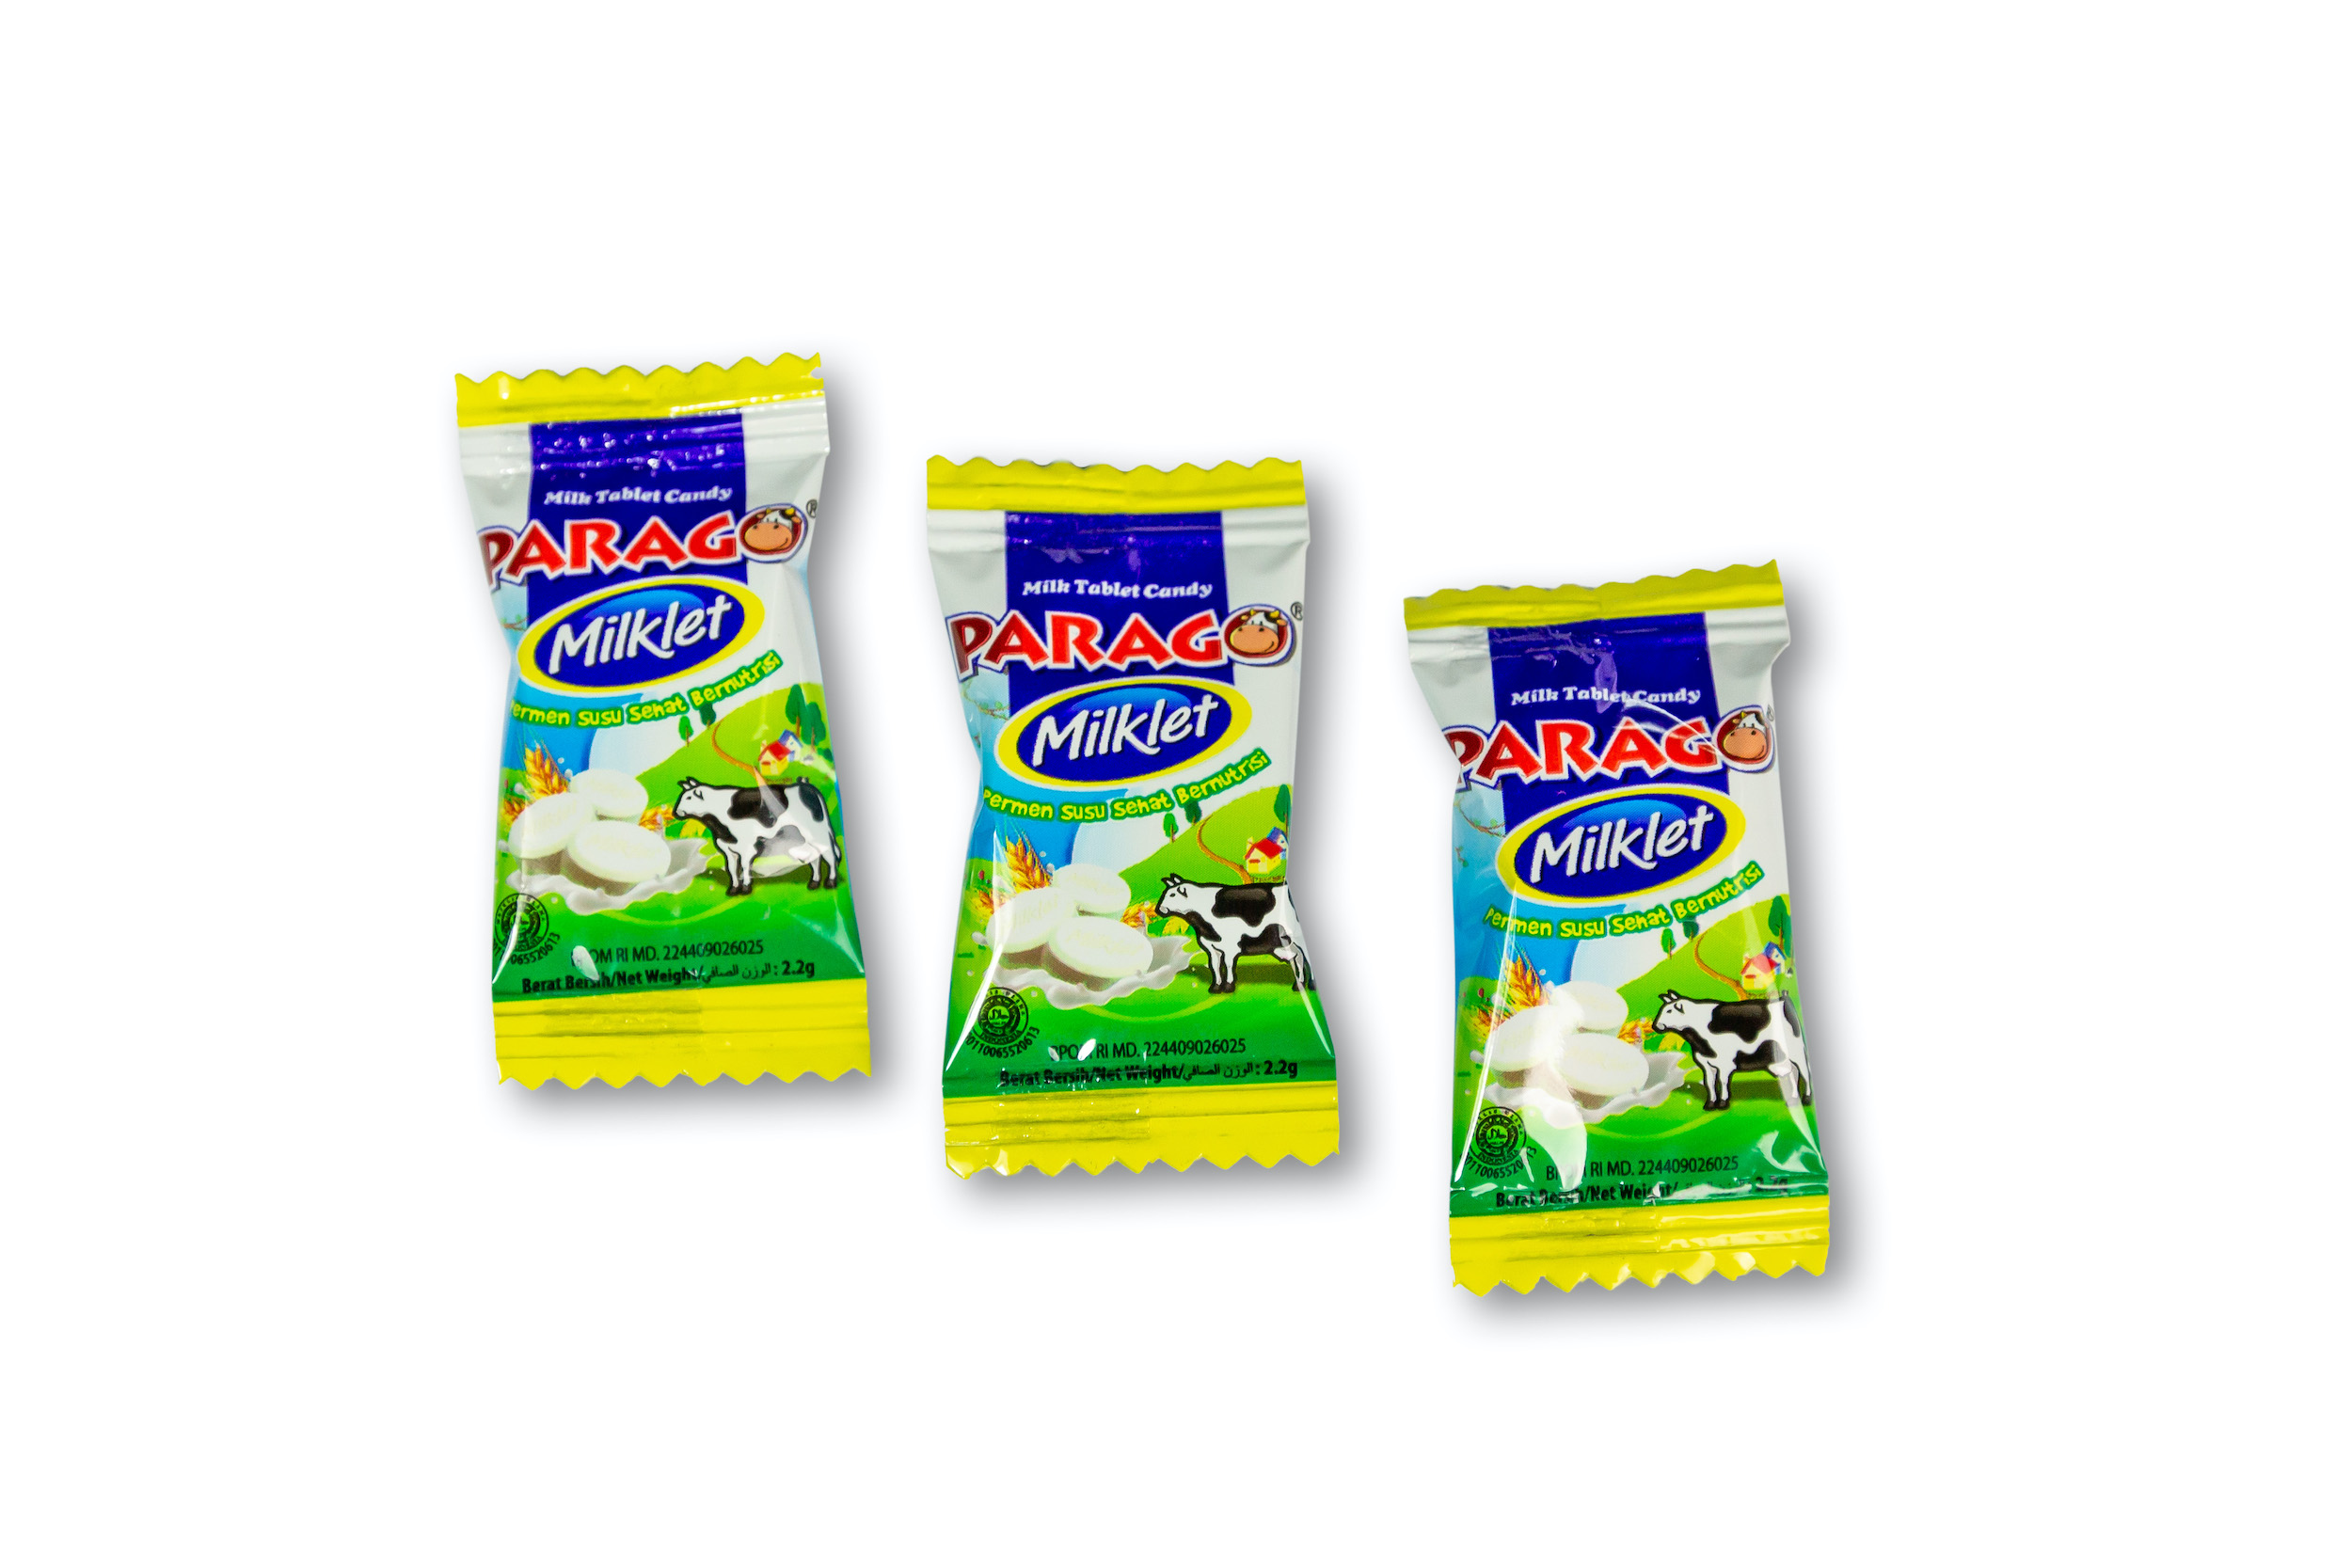 Enjoy the milky goodness of Parago Milklet tablet candy made from high concentration of pure milk, rich in protein, vitamins and calcium. It is a nutritious candy with a delicious creamy taste for children, especially those who don’t like drinking milk. It is easy to chew and digest, this candy is also adult’s all time favourite! Thus Parago Milklet is suitable for all ages.